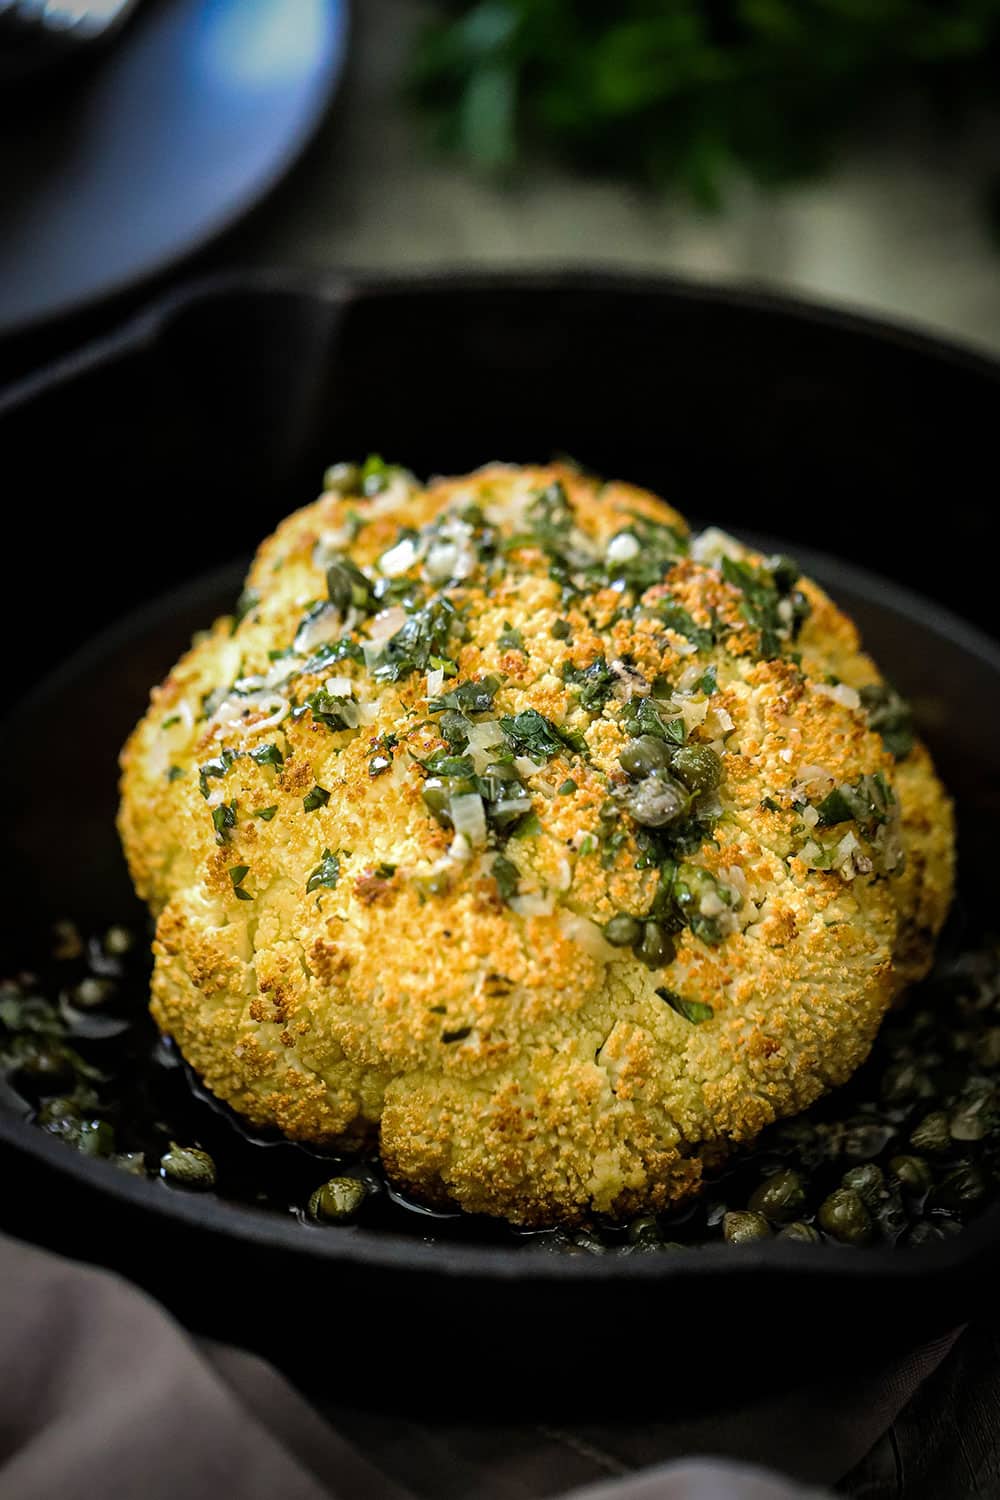 A whole roasted cauliflower with a wine butter herb sauce over the top all in a cast-iron skillet.